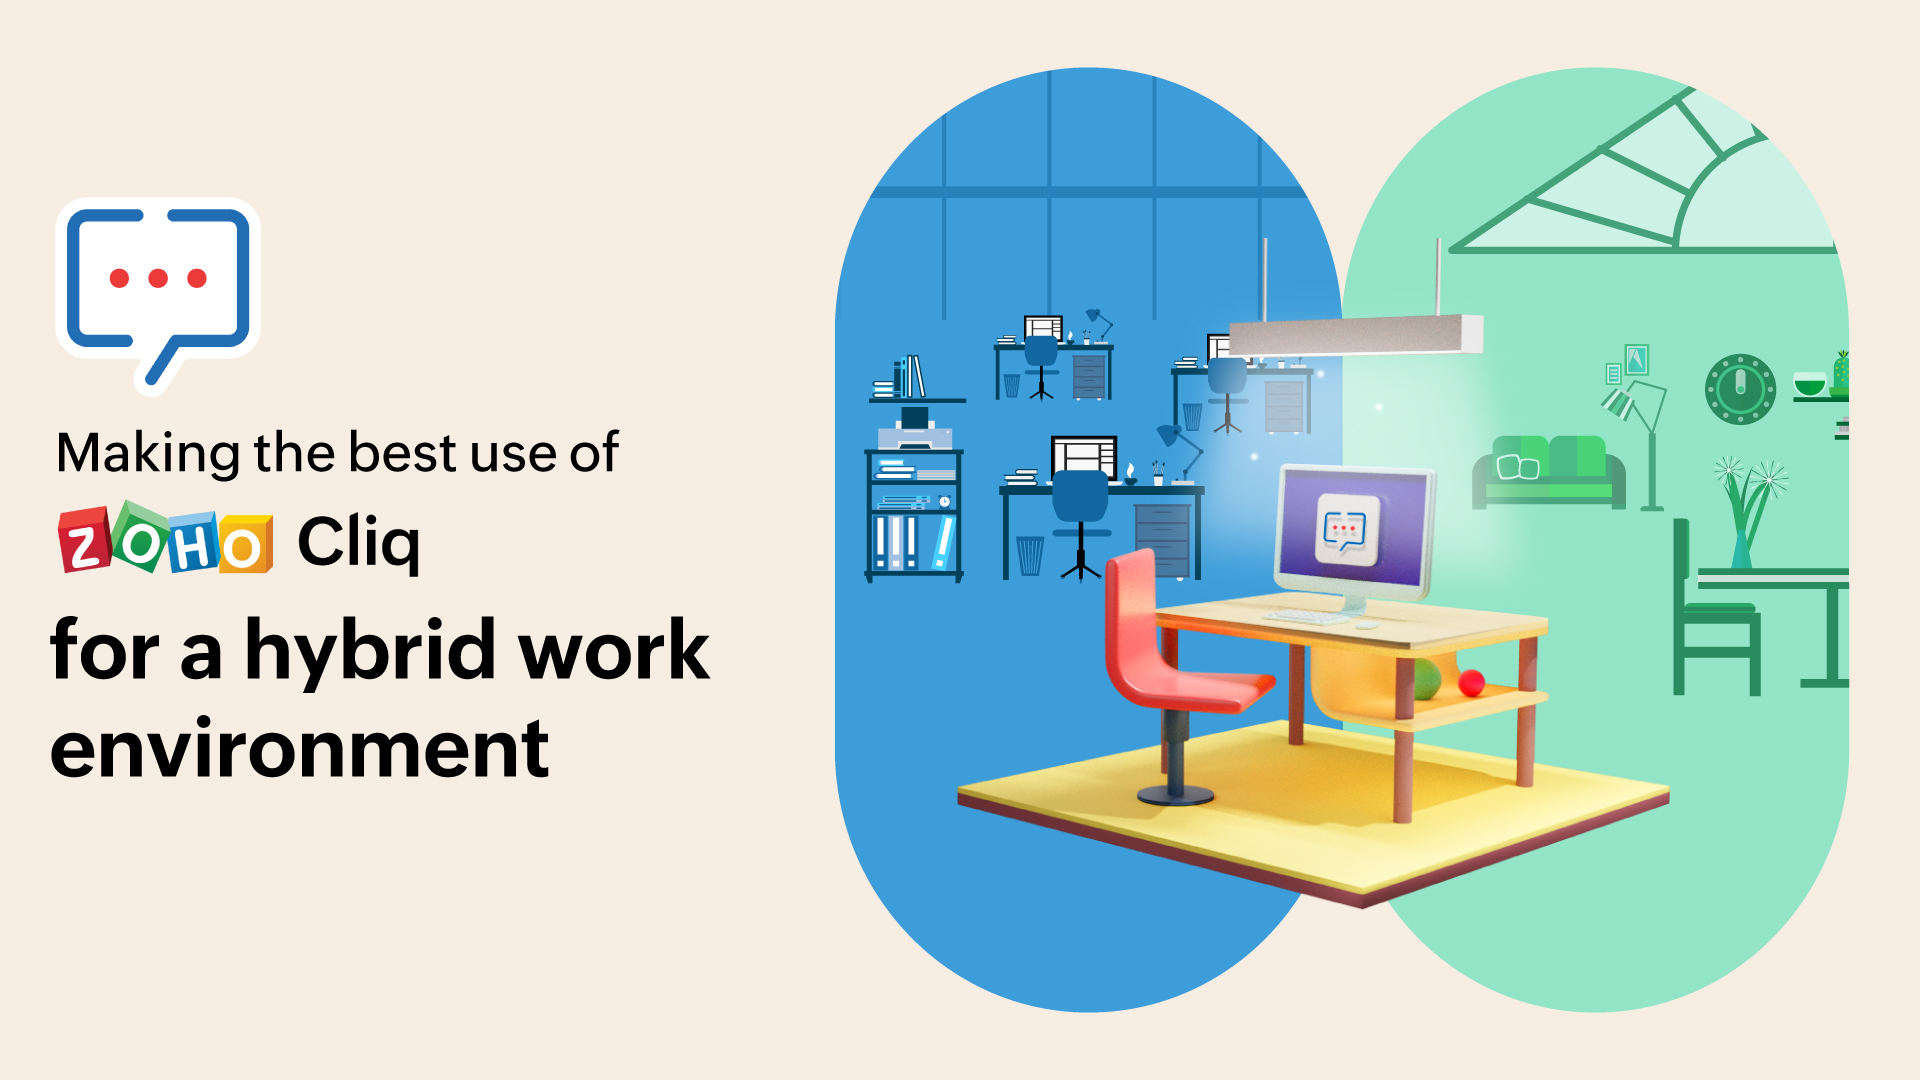 Making the most of Zoho Cliq for a hybrid work environment